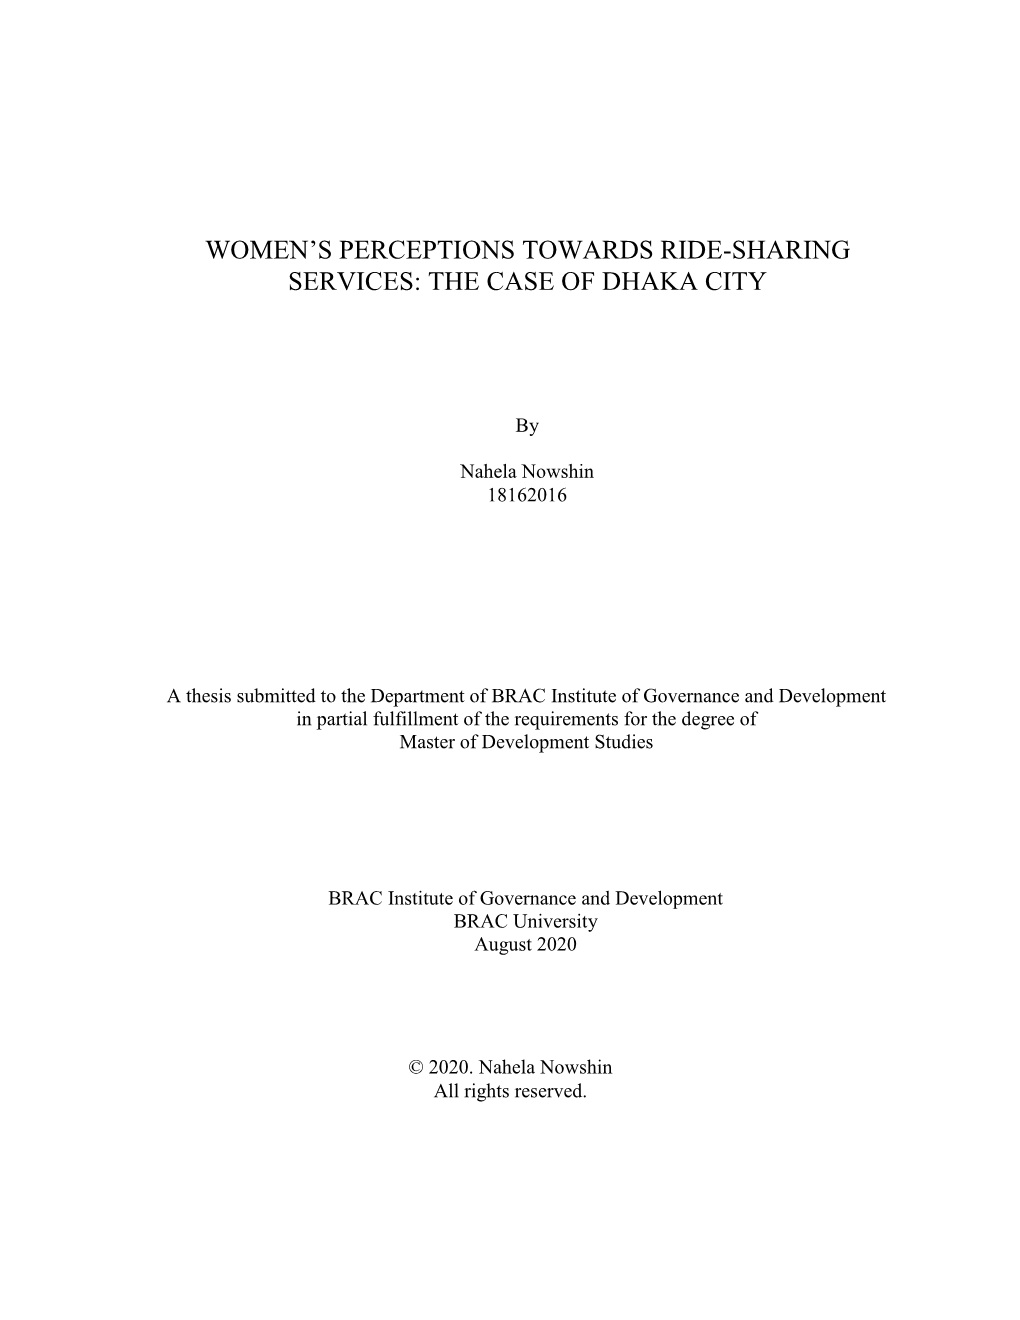 Women's Perceptions Towards Ride-Sharing Services: the Case Of